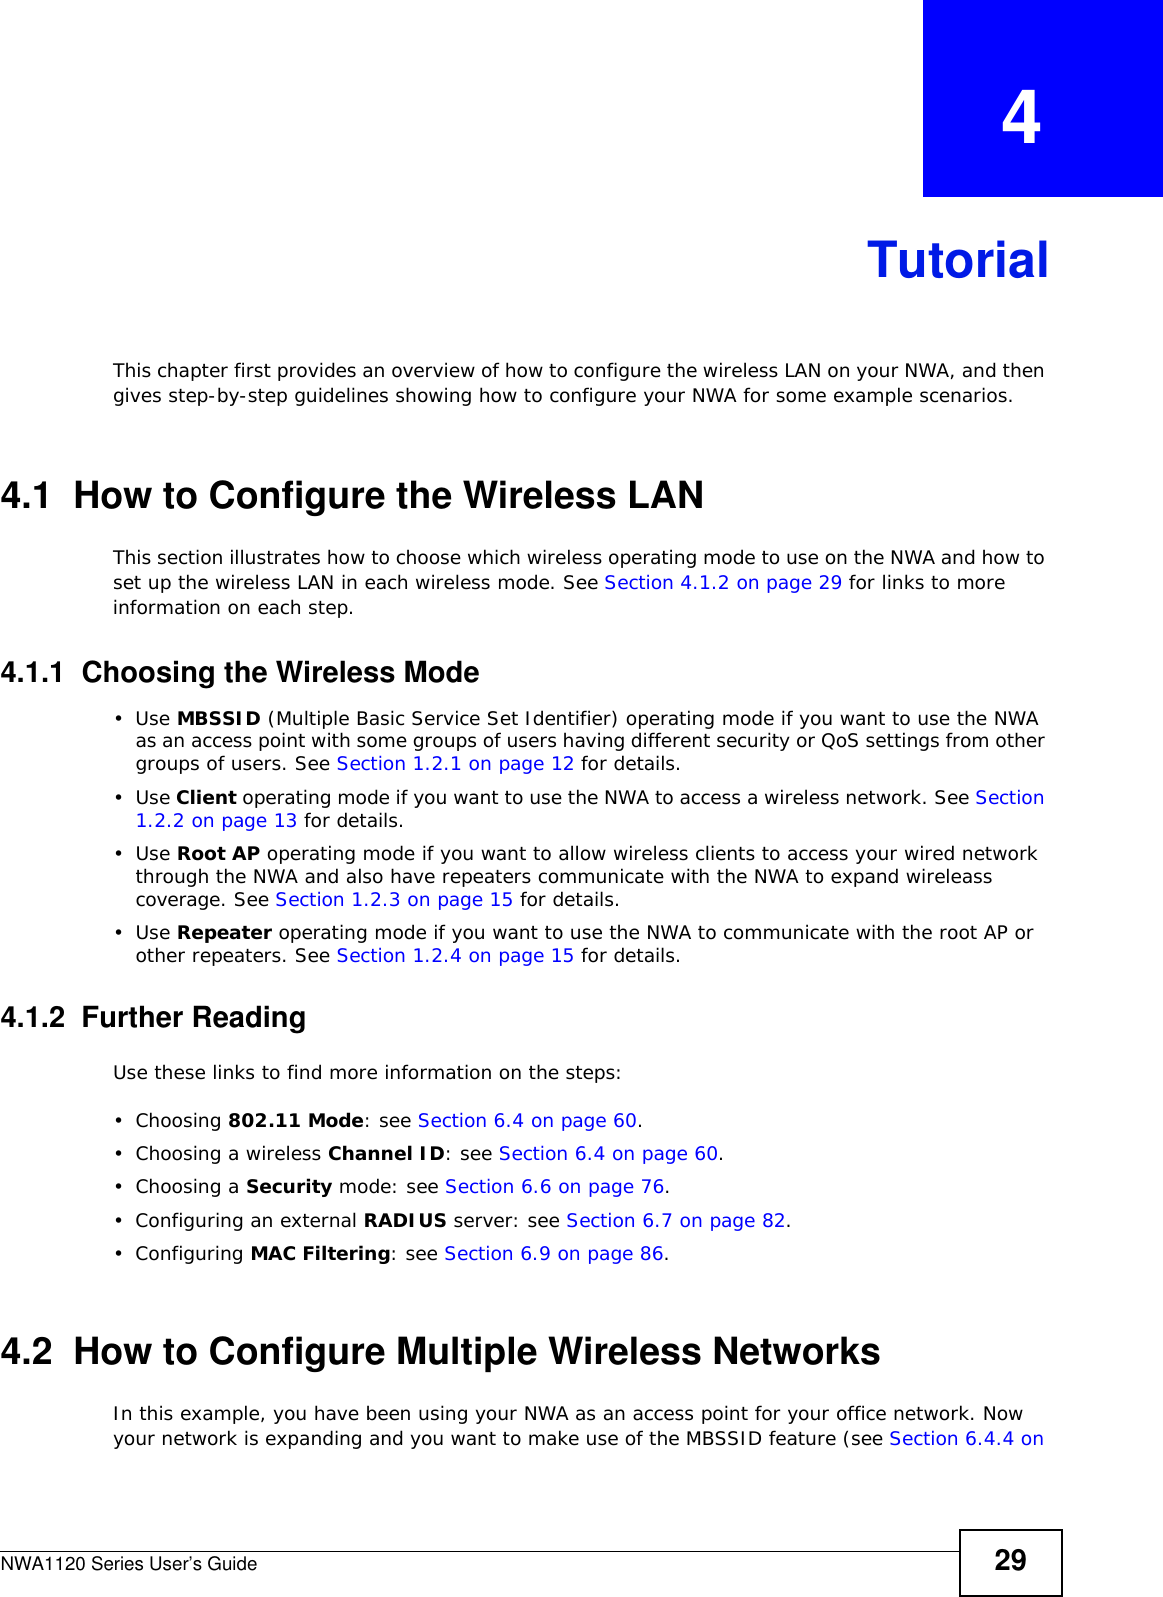 NWA1120 Series User’s Guide 29CHAPTER   4TutorialThis chapter first provides an overview of how to configure the wireless LAN on your NWA, and then gives step-by-step guidelines showing how to configure your NWA for some example scenarios. 4.1  How to Configure the Wireless LANThis section illustrates how to choose which wireless operating mode to use on the NWA and how to set up the wireless LAN in each wireless mode. See Section 4.1.2 on page 29 for links to more information on each step.4.1.1  Choosing the Wireless Mode•Use MBSSID (Multiple Basic Service Set Identifier) operating mode if you want to use the NWA as an access point with some groups of users having different security or QoS settings from other groups of users. See Section 1.2.1 on page 12 for details.•Use Client operating mode if you want to use the NWA to access a wireless network. See Section 1.2.2 on page 13 for details.•Use Root AP operating mode if you want to allow wireless clients to access your wired network through the NWA and also have repeaters communicate with the NWA to expand wireleass coverage. See Section 1.2.3 on page 15 for details.•Use Repeater operating mode if you want to use the NWA to communicate with the root AP or other repeaters. See Section 1.2.4 on page 15 for details.4.1.2  Further ReadingUse these links to find more information on the steps:• Choosing 802.11 Mode: see Section 6.4 on page 60.• Choosing a wireless Channel ID: see Section 6.4 on page 60.• Choosing a Security mode: see Section 6.6 on page 76.• Configuring an external RADIUS server: see Section 6.7 on page 82.•Configuring MAC Filtering: see Section 6.9 on page 86.4.2  How to Configure Multiple Wireless NetworksIn this example, you have been using your NWA as an access point for your office network. Now your network is expanding and you want to make use of the MBSSID feature (see Section 6.4.4 on 